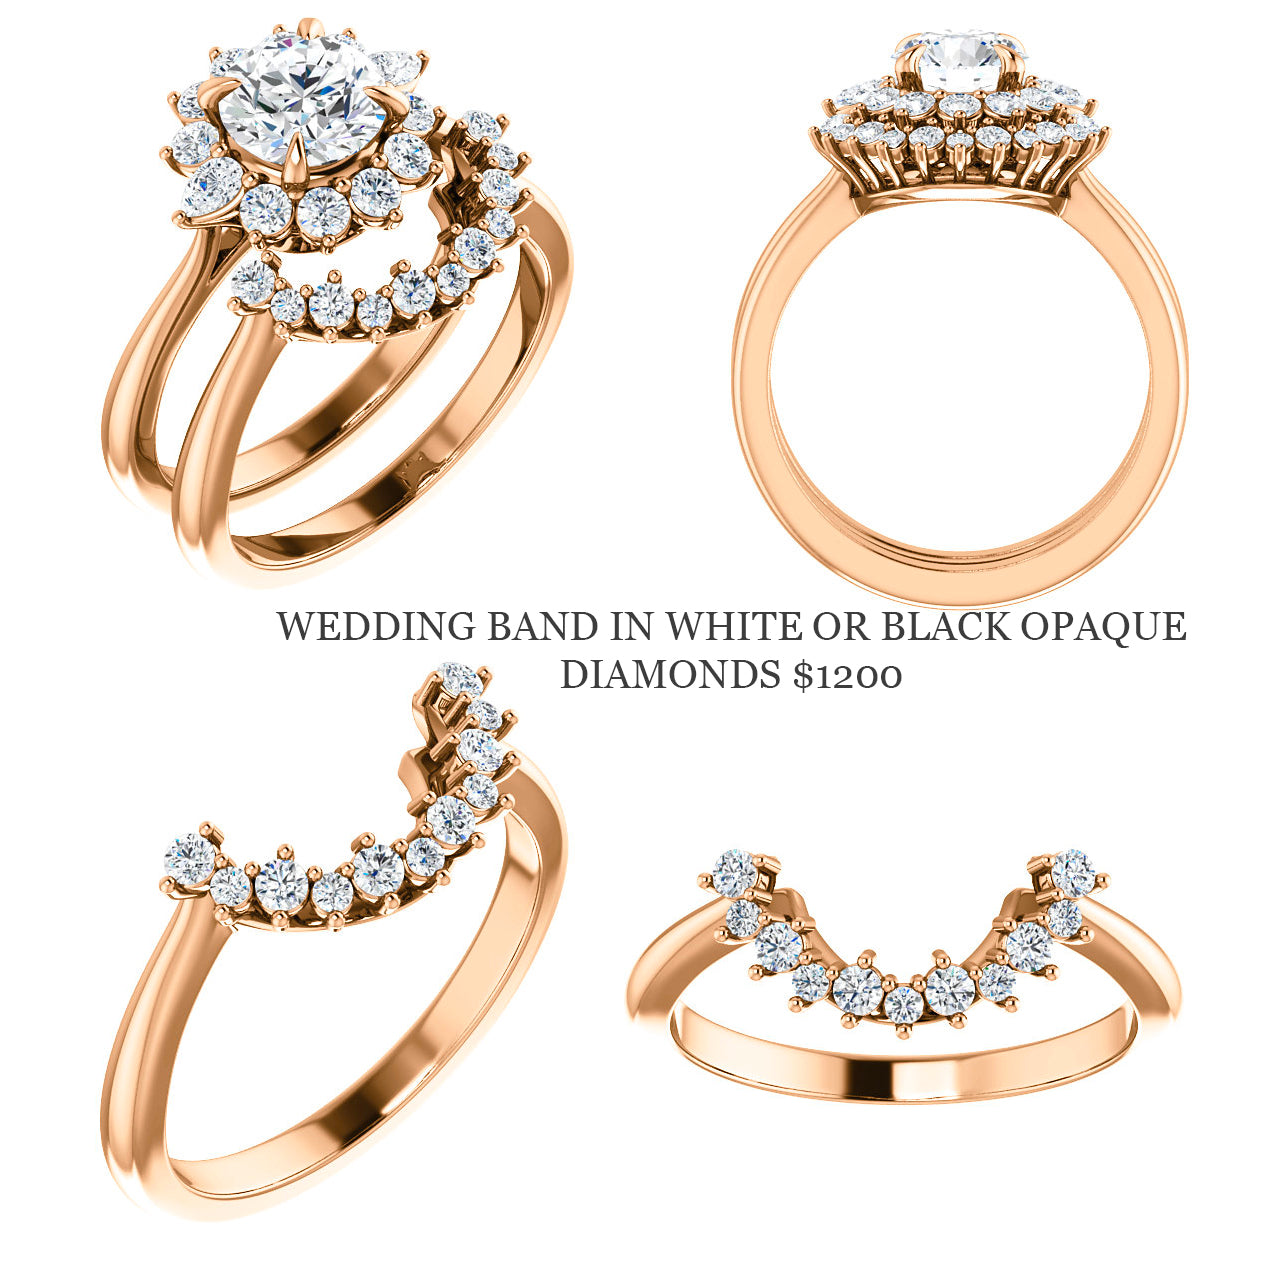 Dahlia Setting - Midwinter Co. Alternative Bridal Rings and Modern Fine Jewelry